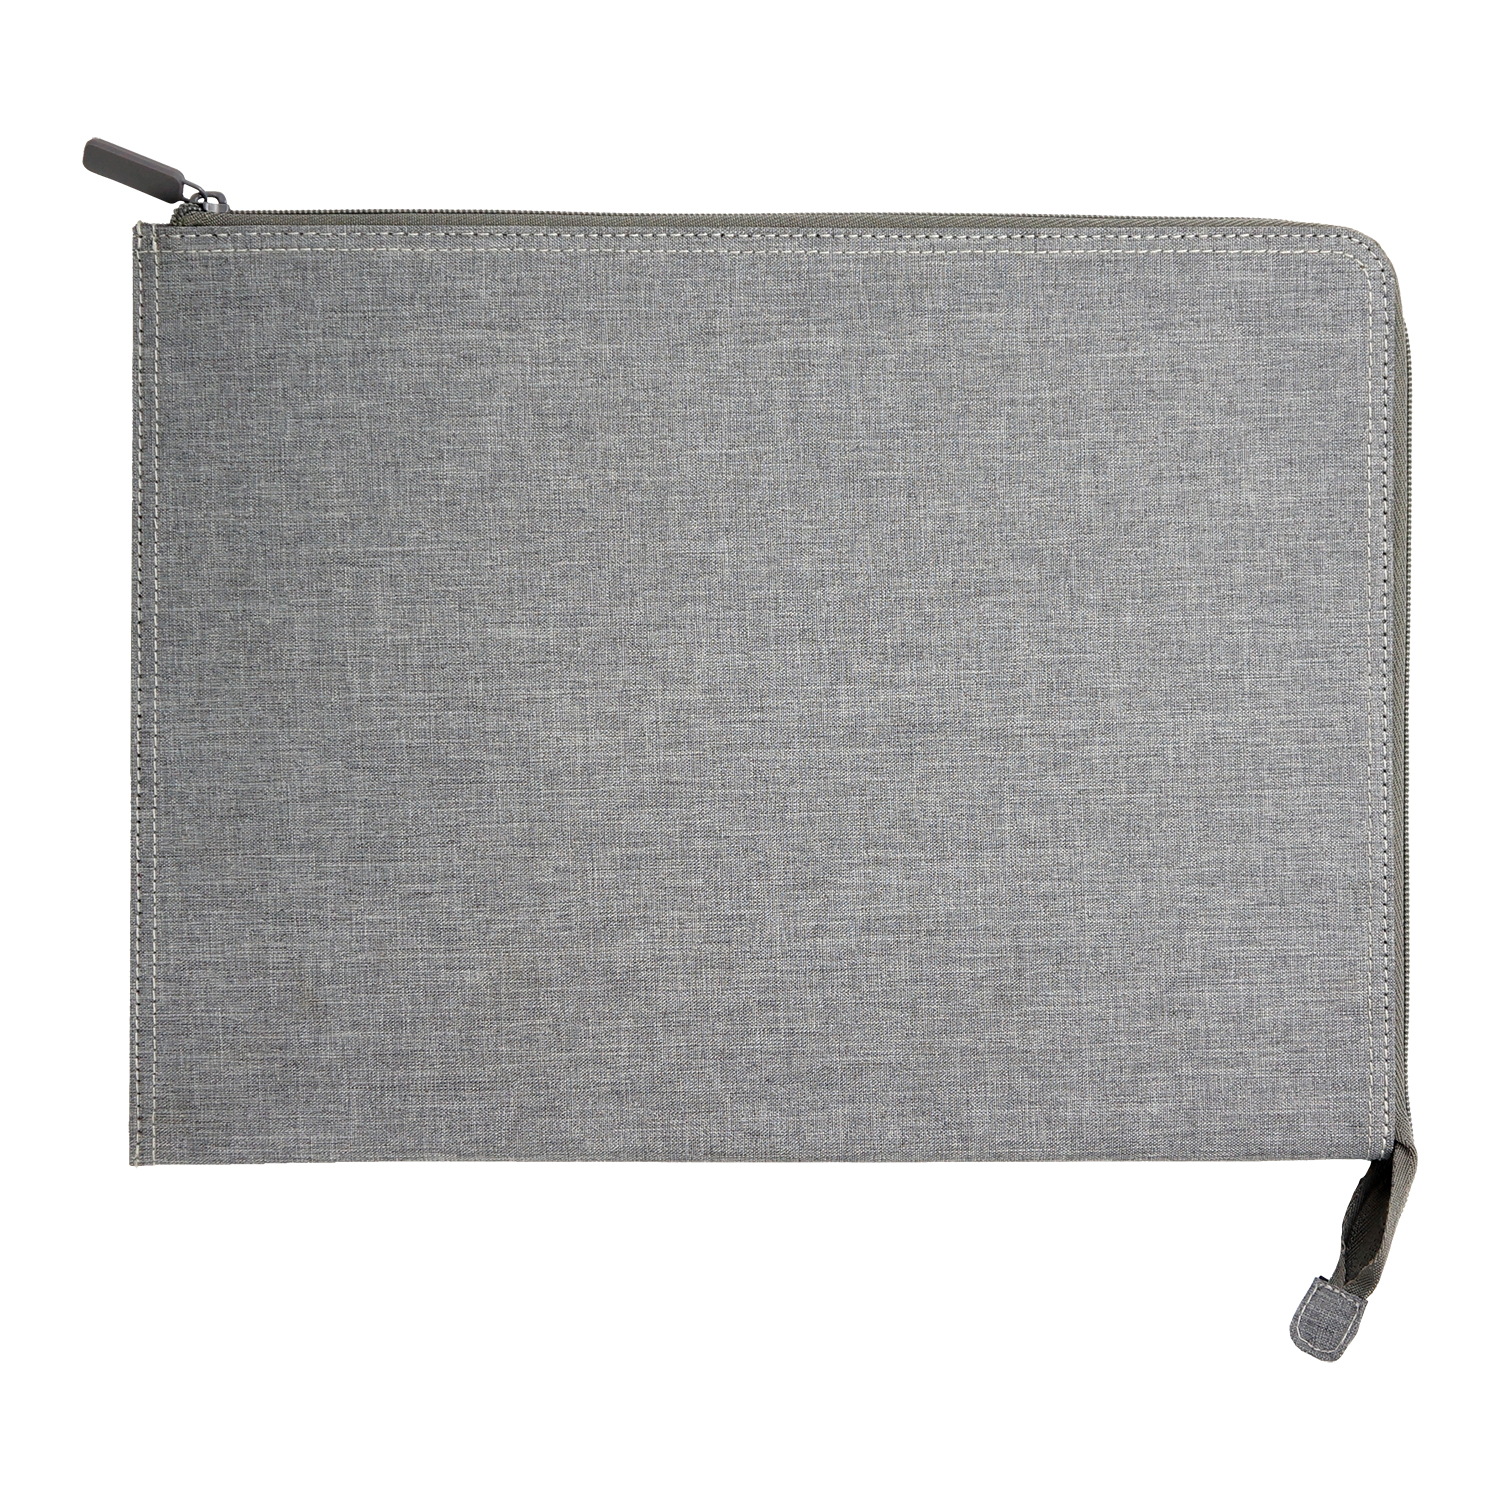 OF-1718 Tablet Sleeves Gray